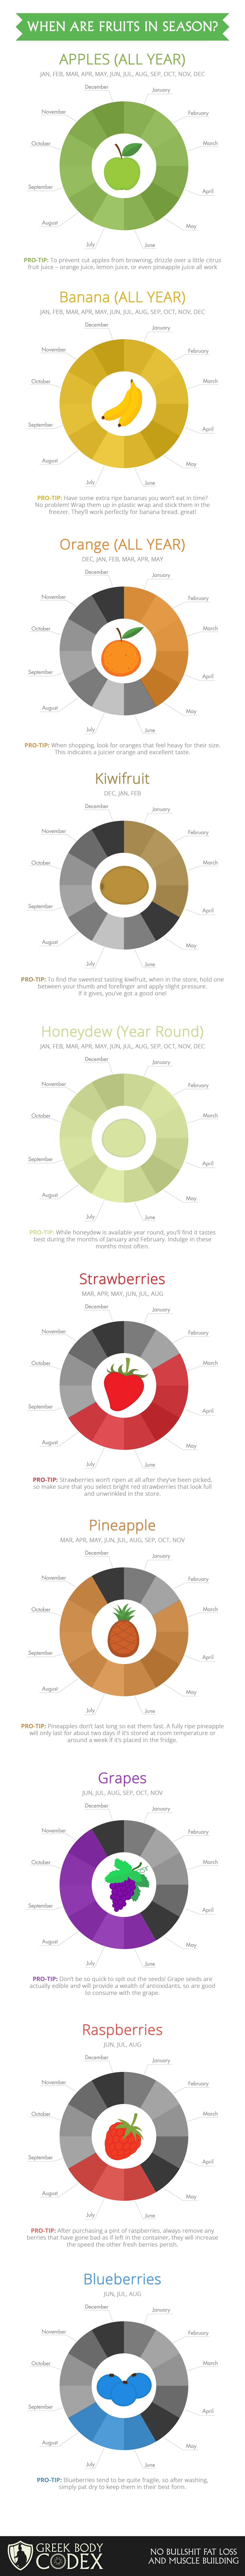 When Are Fruits and Vegetables in Season? infographic